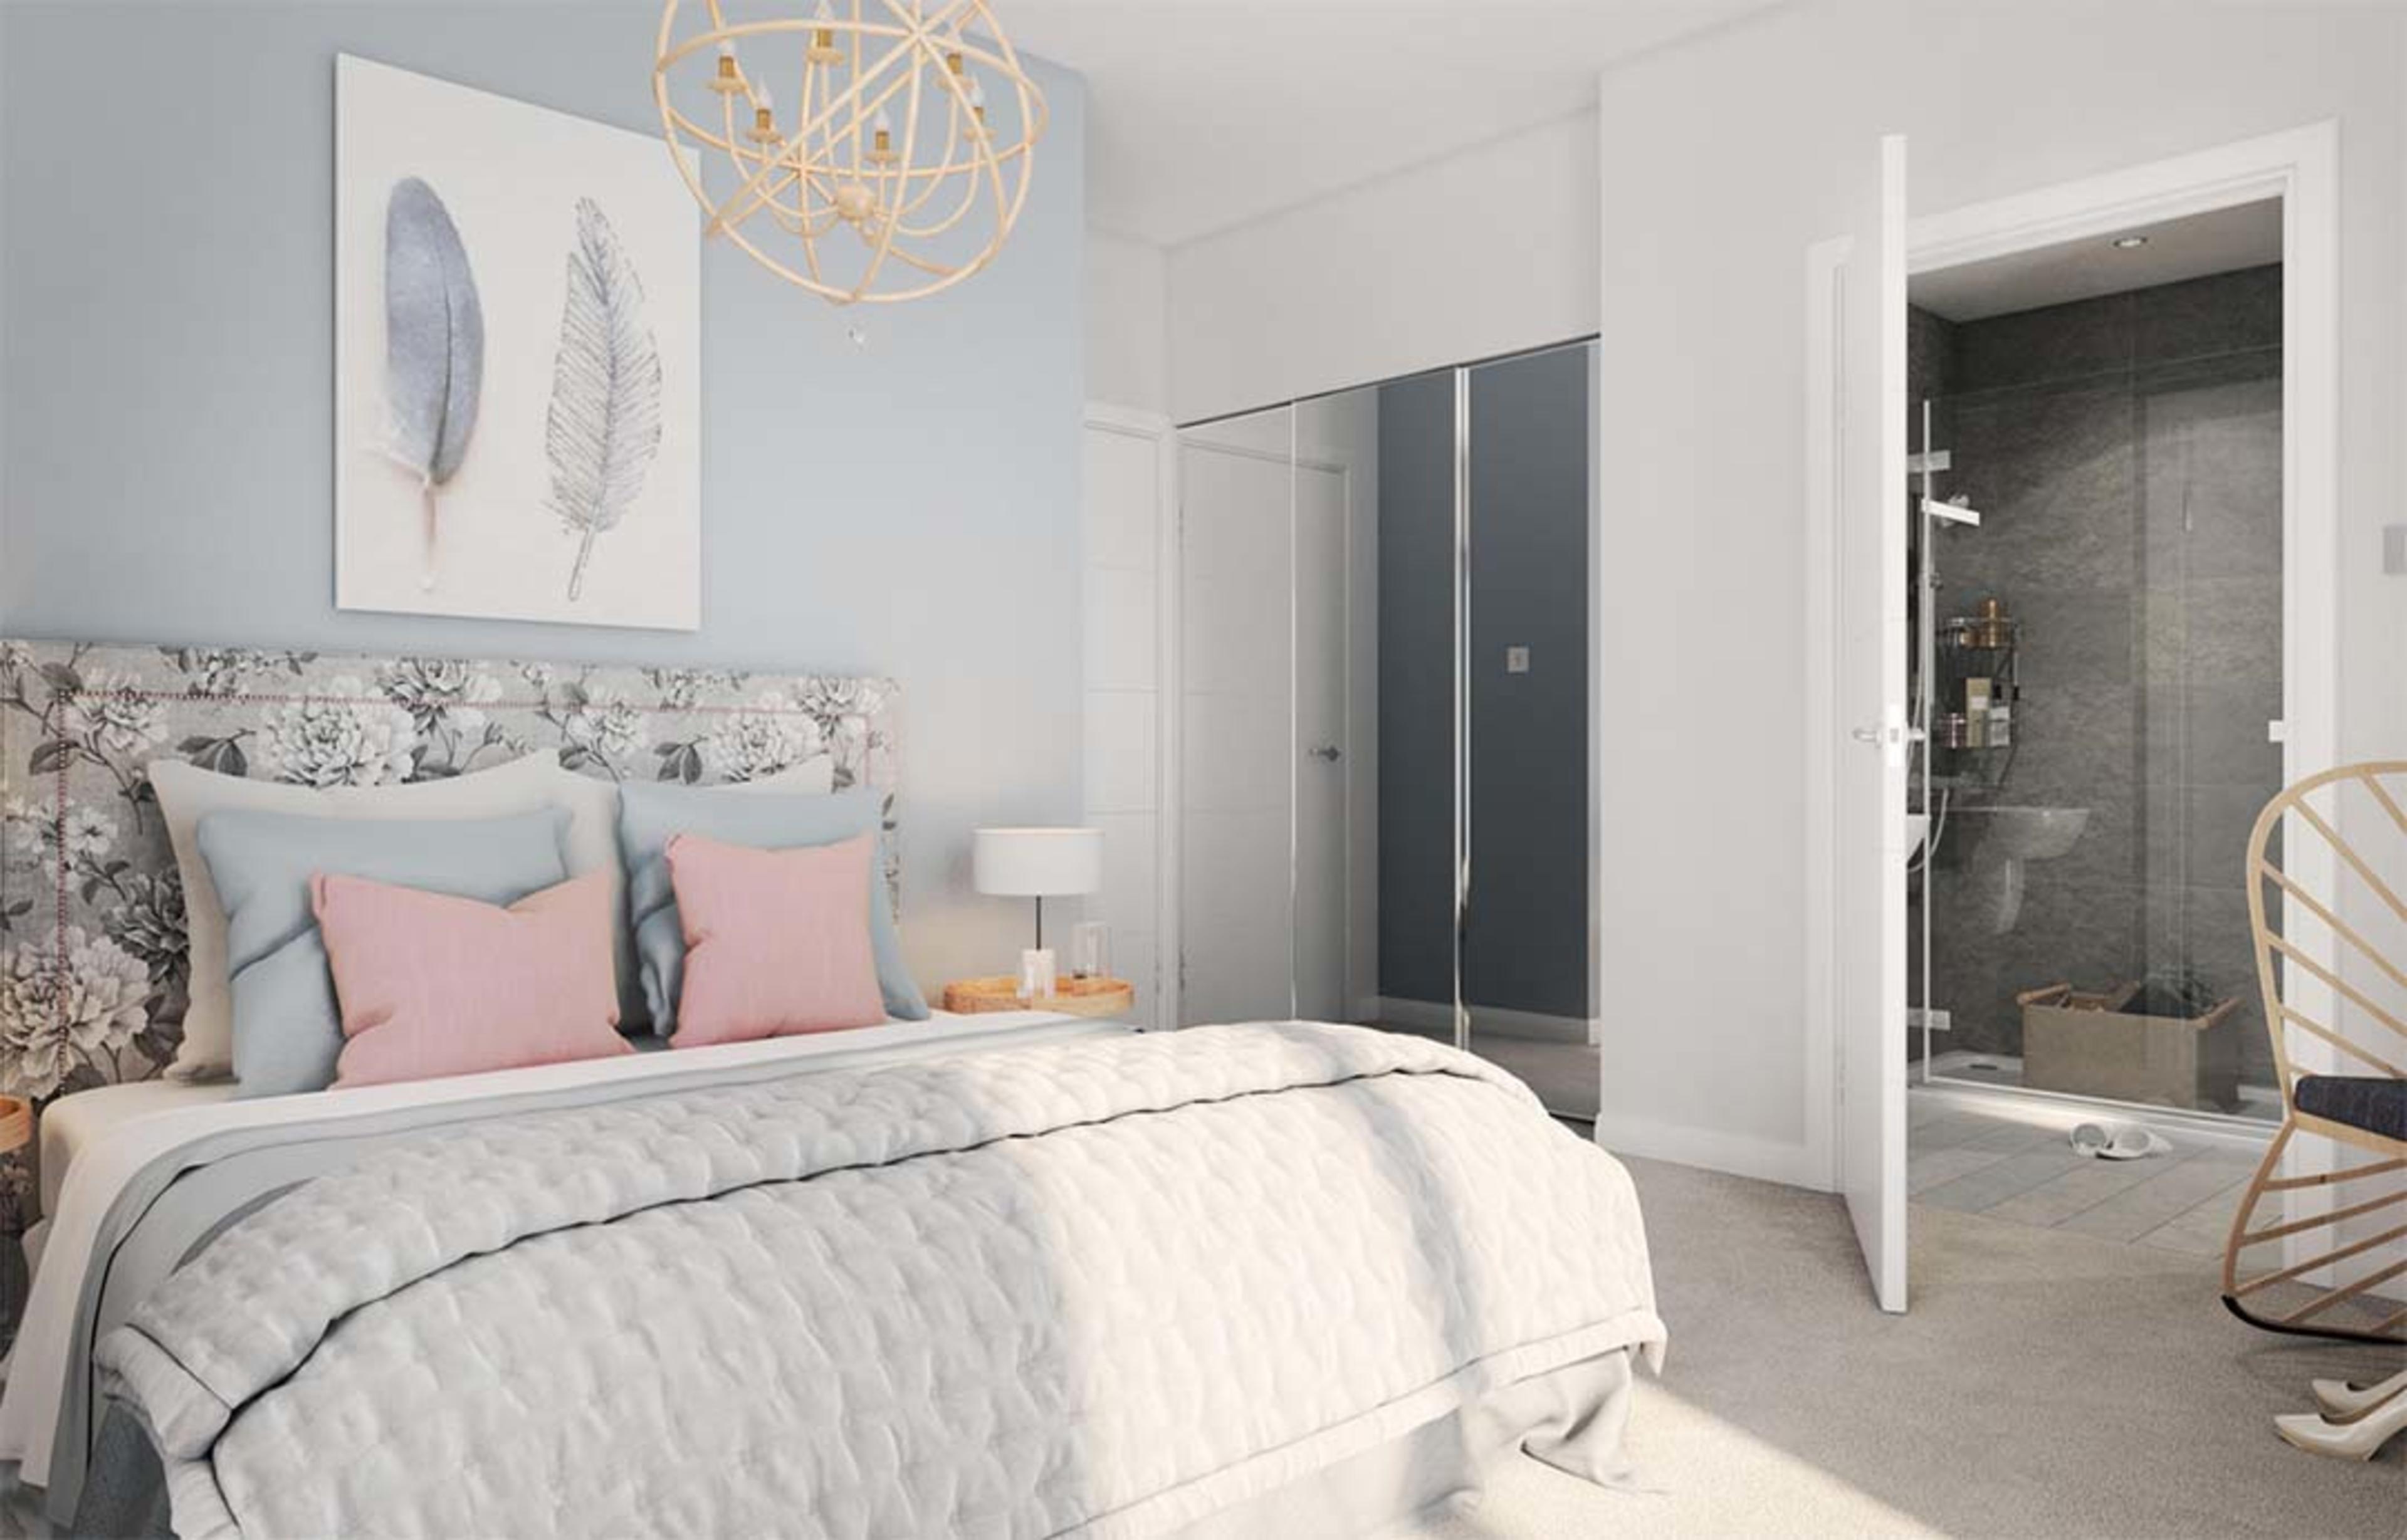 meaux-rise-kingswood-hull-new-persona-homes-beat-bedroom